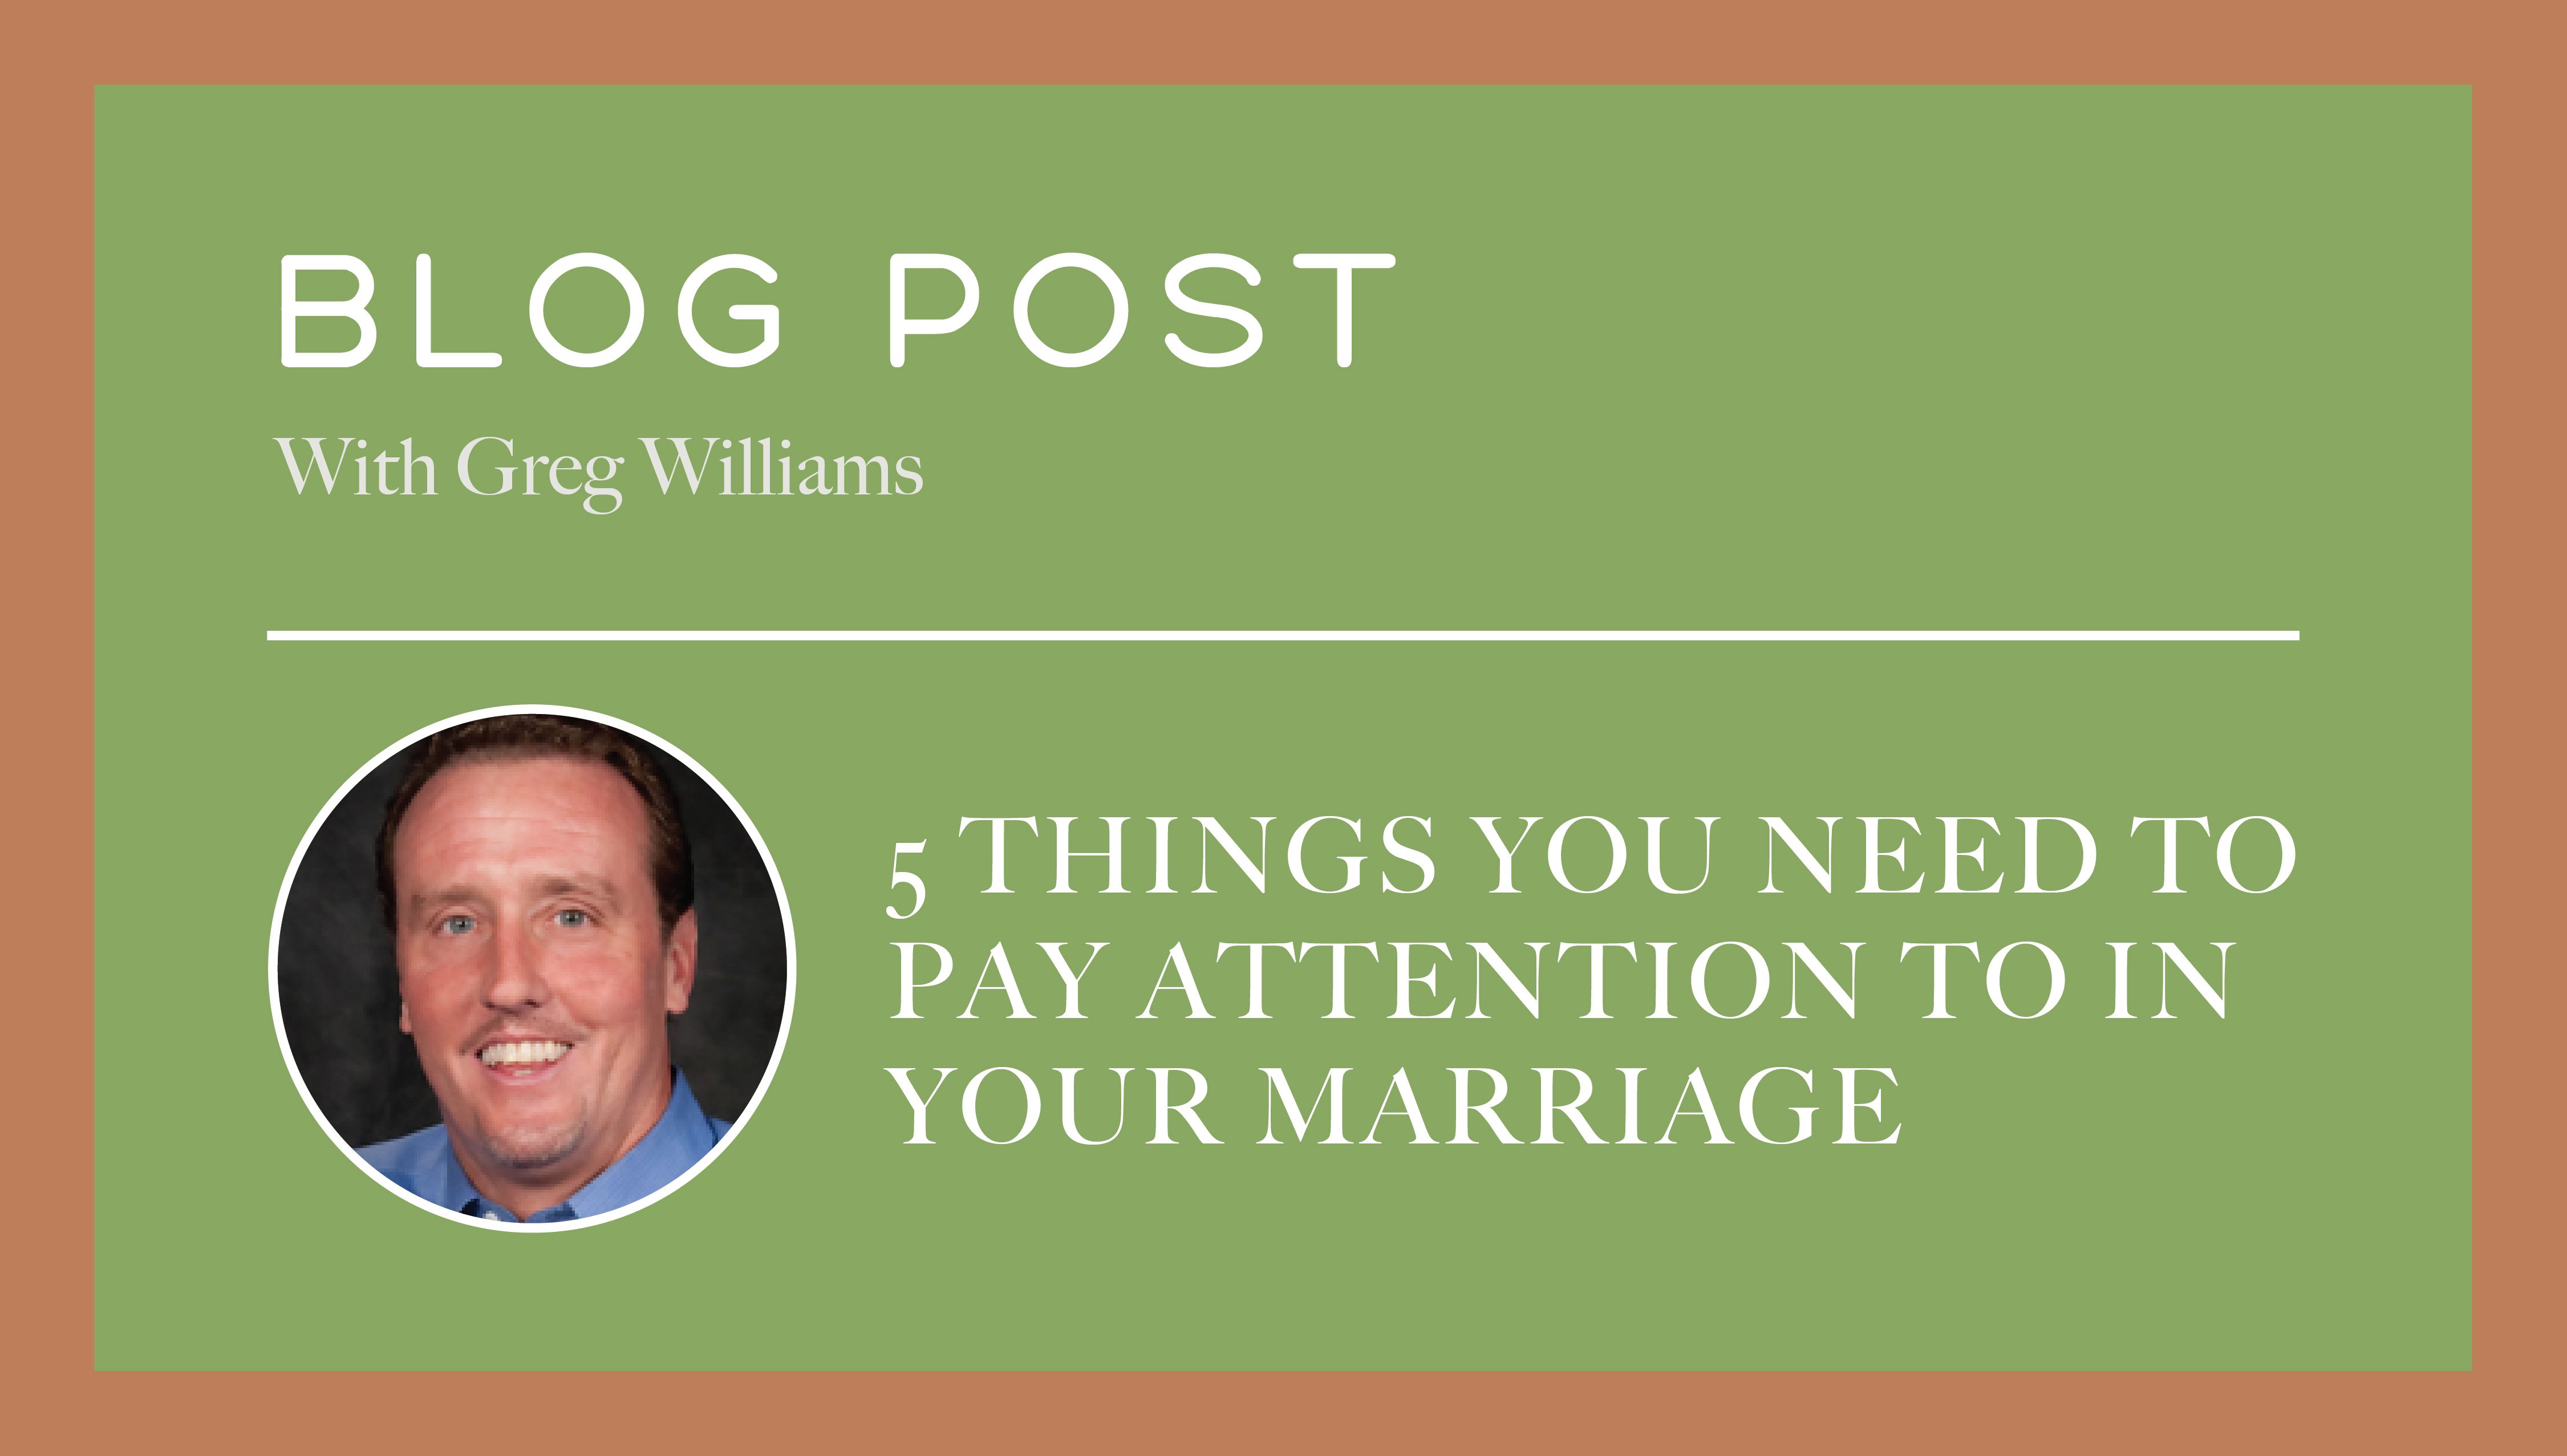 5 Things You Need to Pay Attention to in Your Marriage